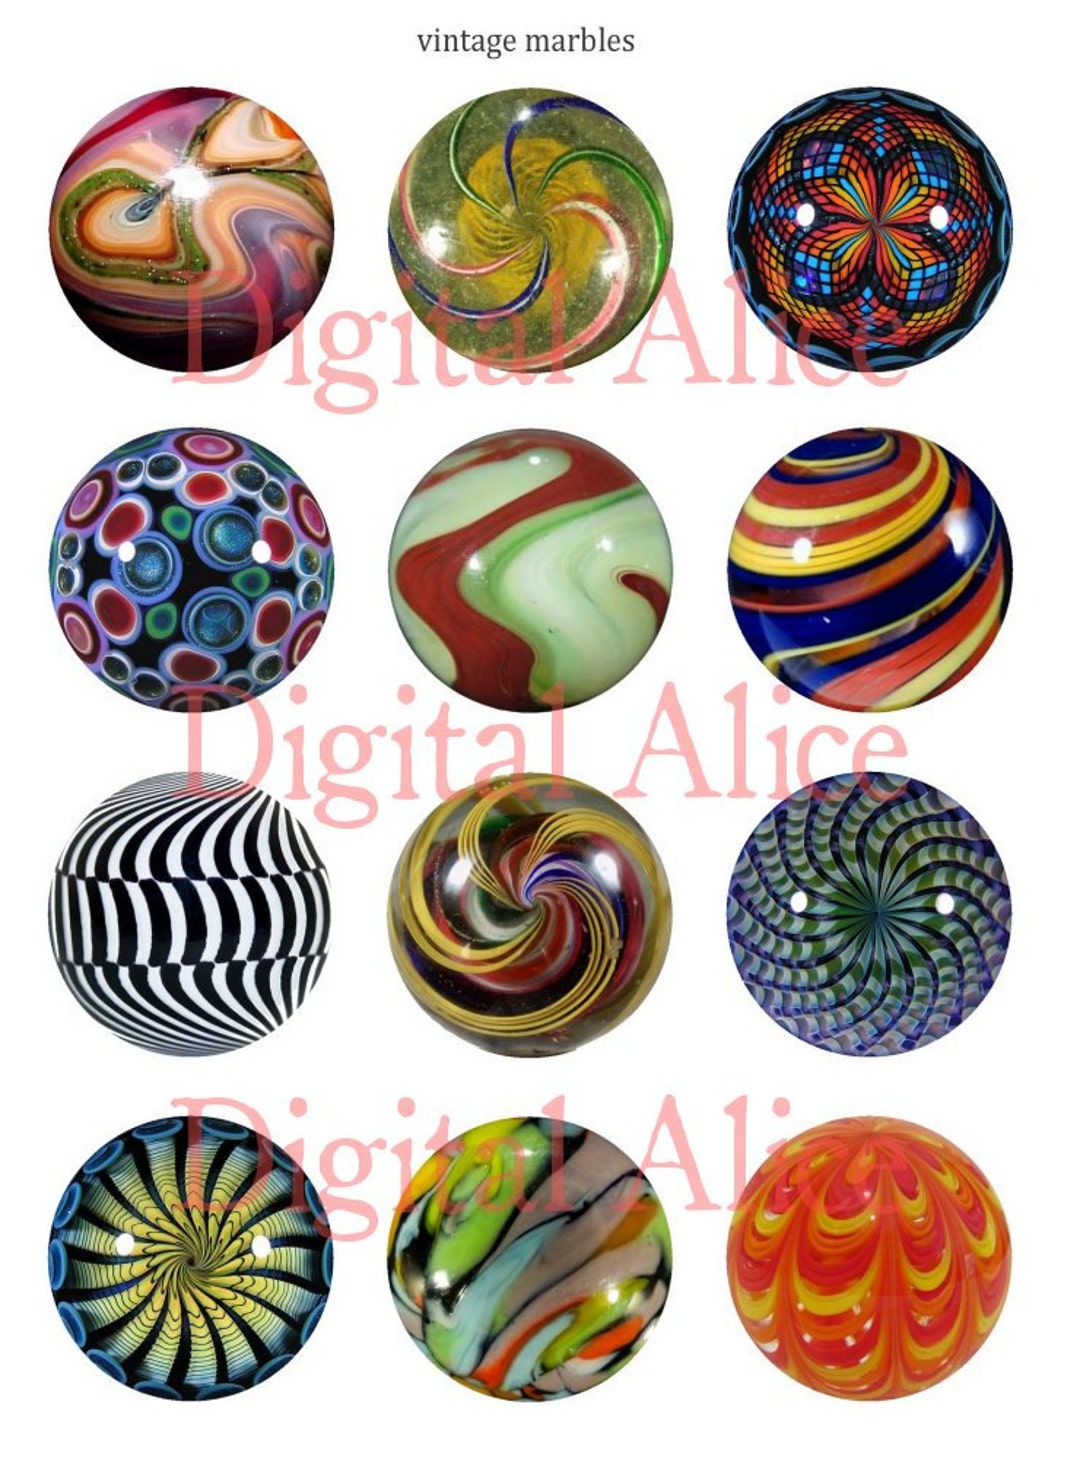 Vintage Glass Marbles – Carter and Holmes Orchids